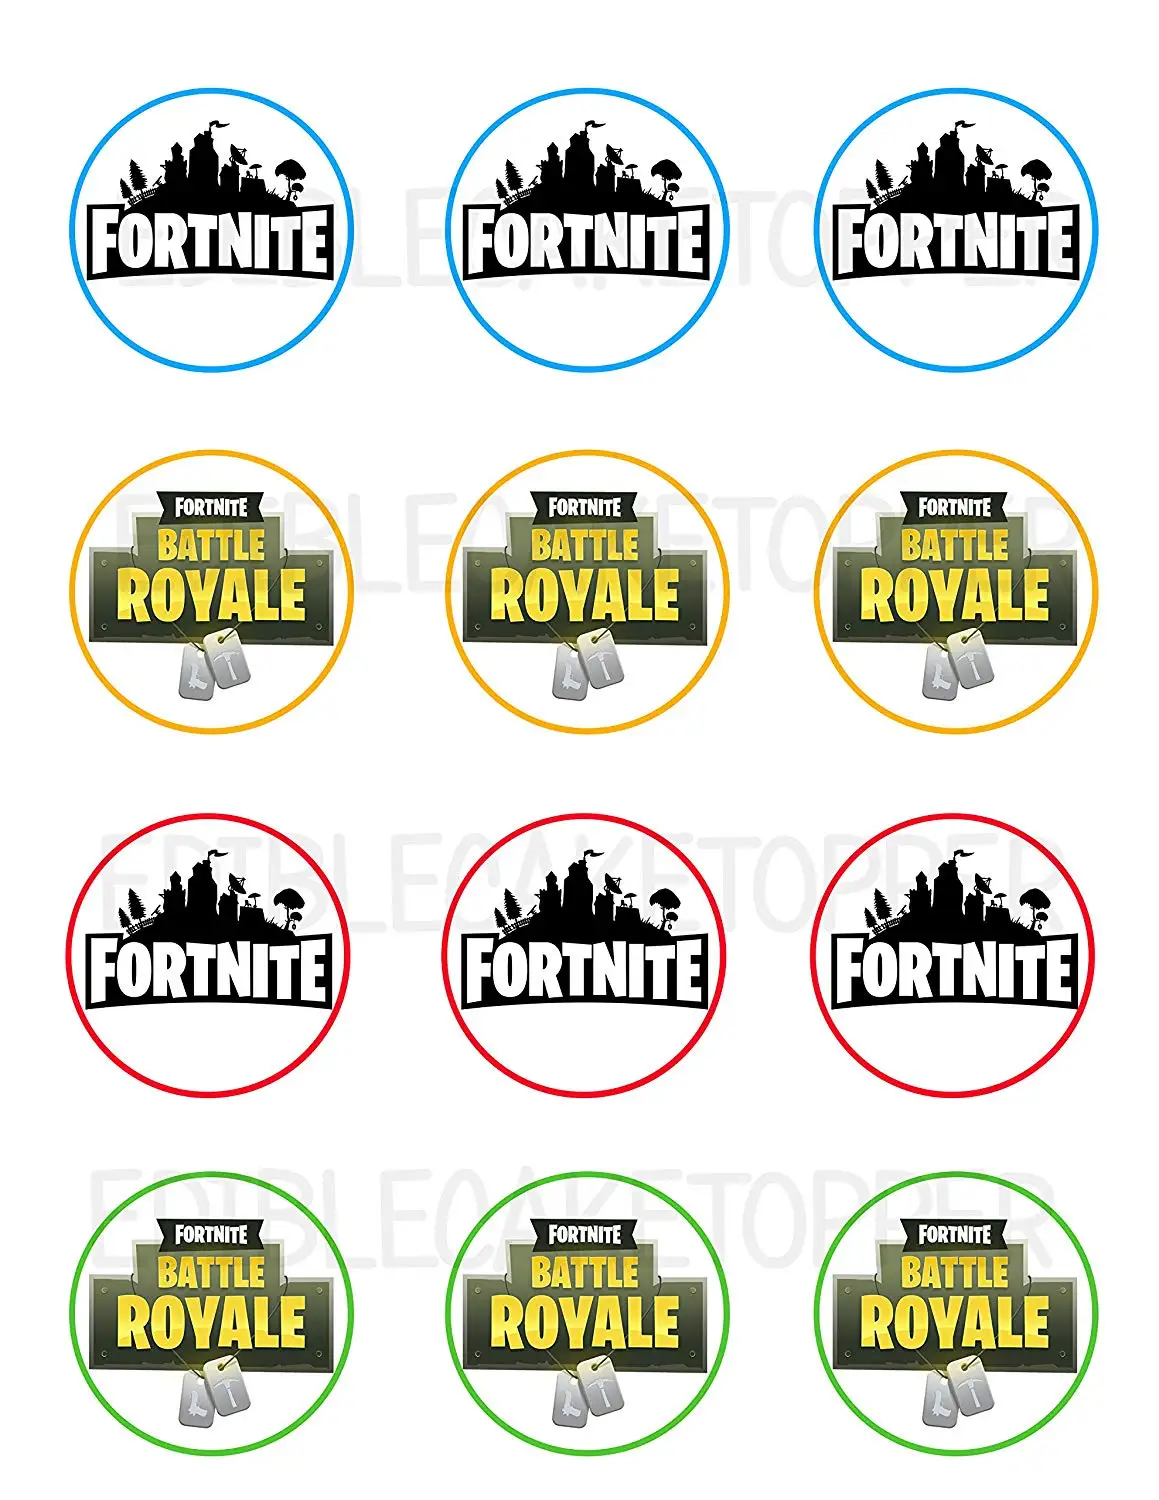 Buy Fortnite Edible Cake Toppers For Your Birthday Cakes 8 X 10 5 - fortnite battle royale edible cupcake toppers 12 images cake image icing sugar sheet edible